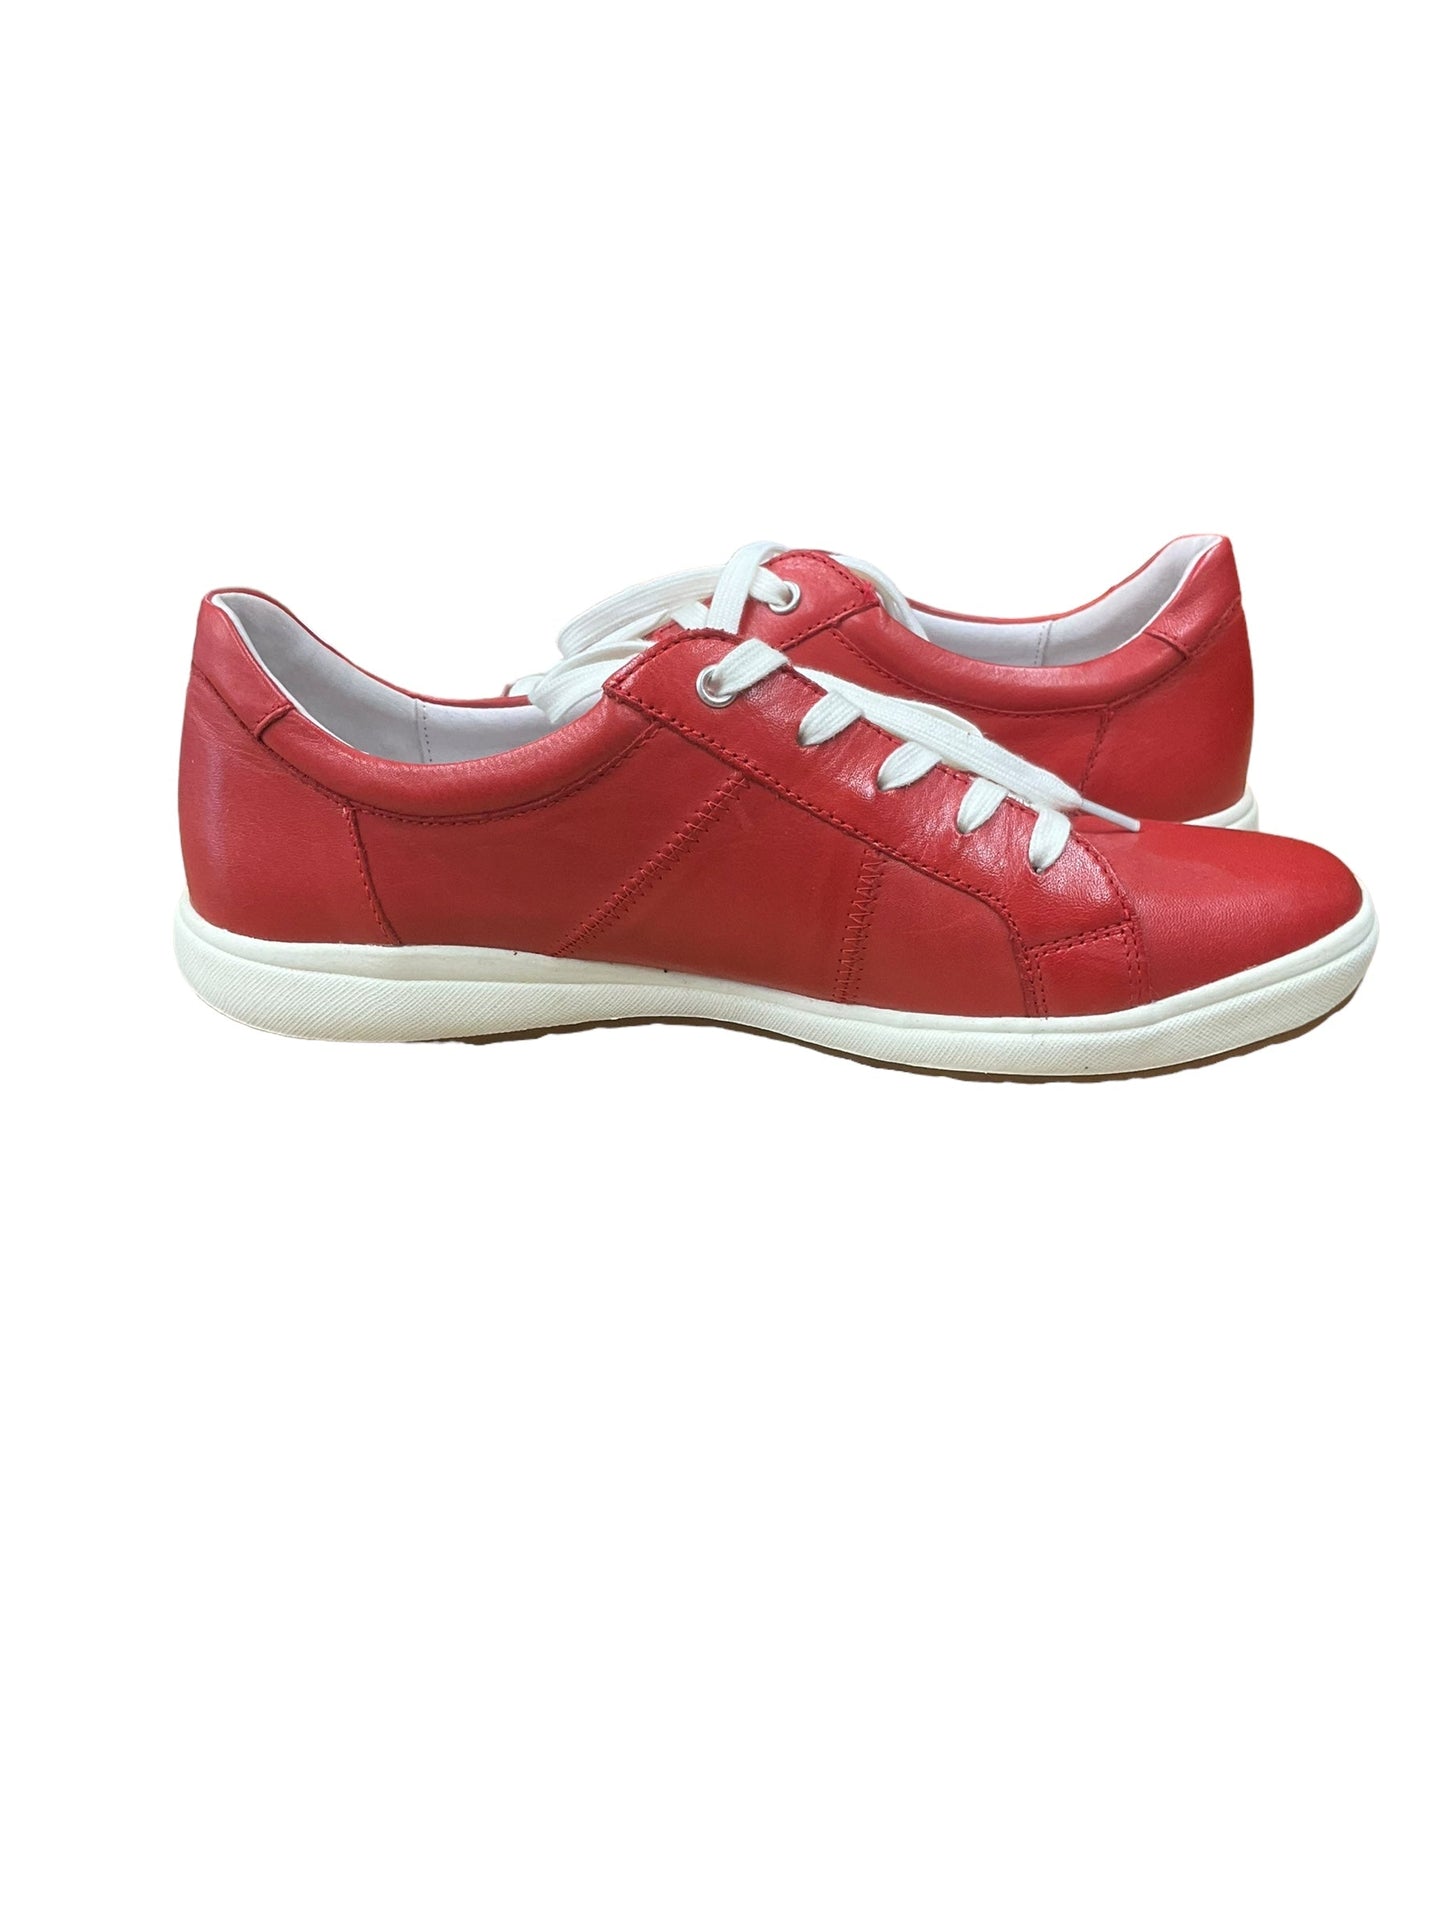 Red Shoes Sneakers Josef Seibel, Size 9